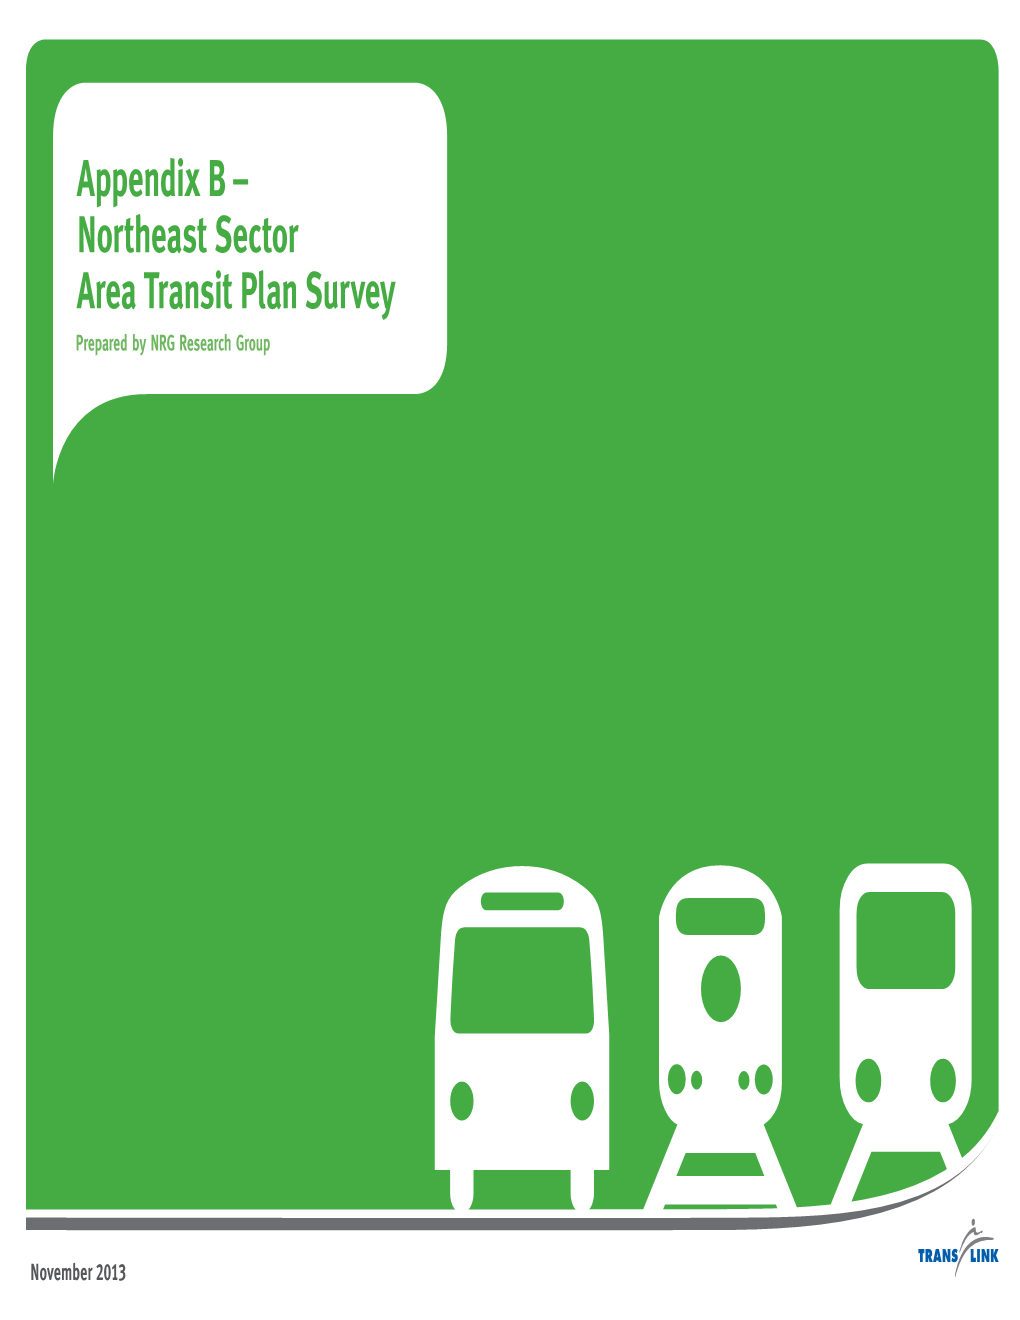 Appendix B – Northeast Sector Area Transit Plan Survey Prepared by NRG Research Group